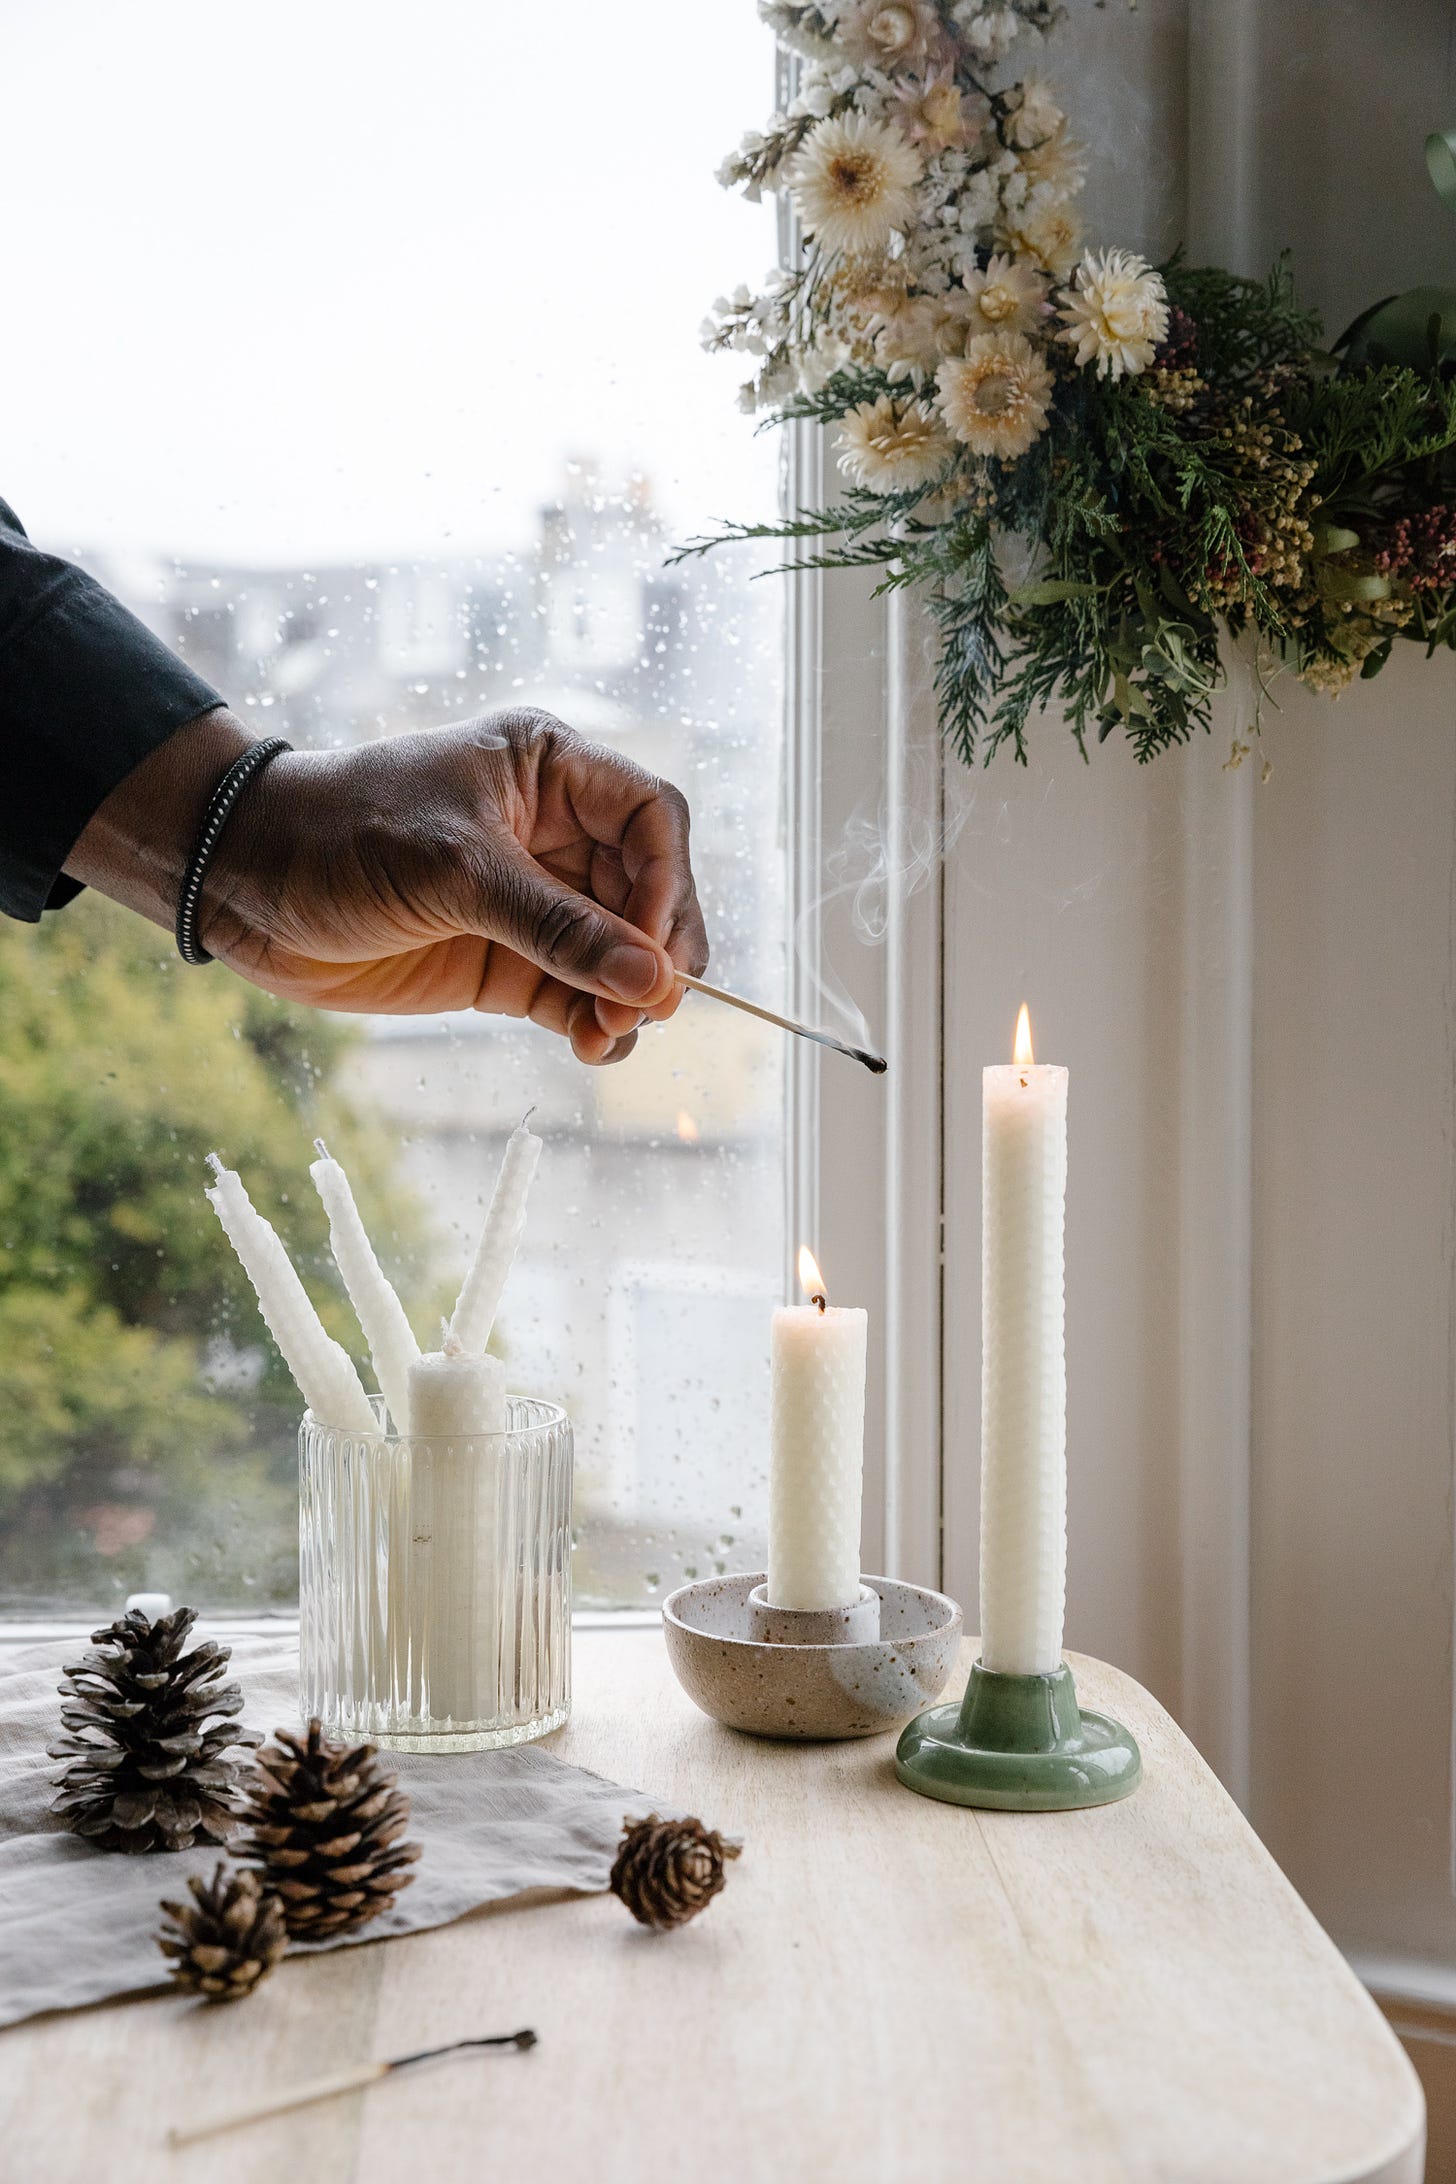 A man's hand is lighting a  candle in front of a rainy window.